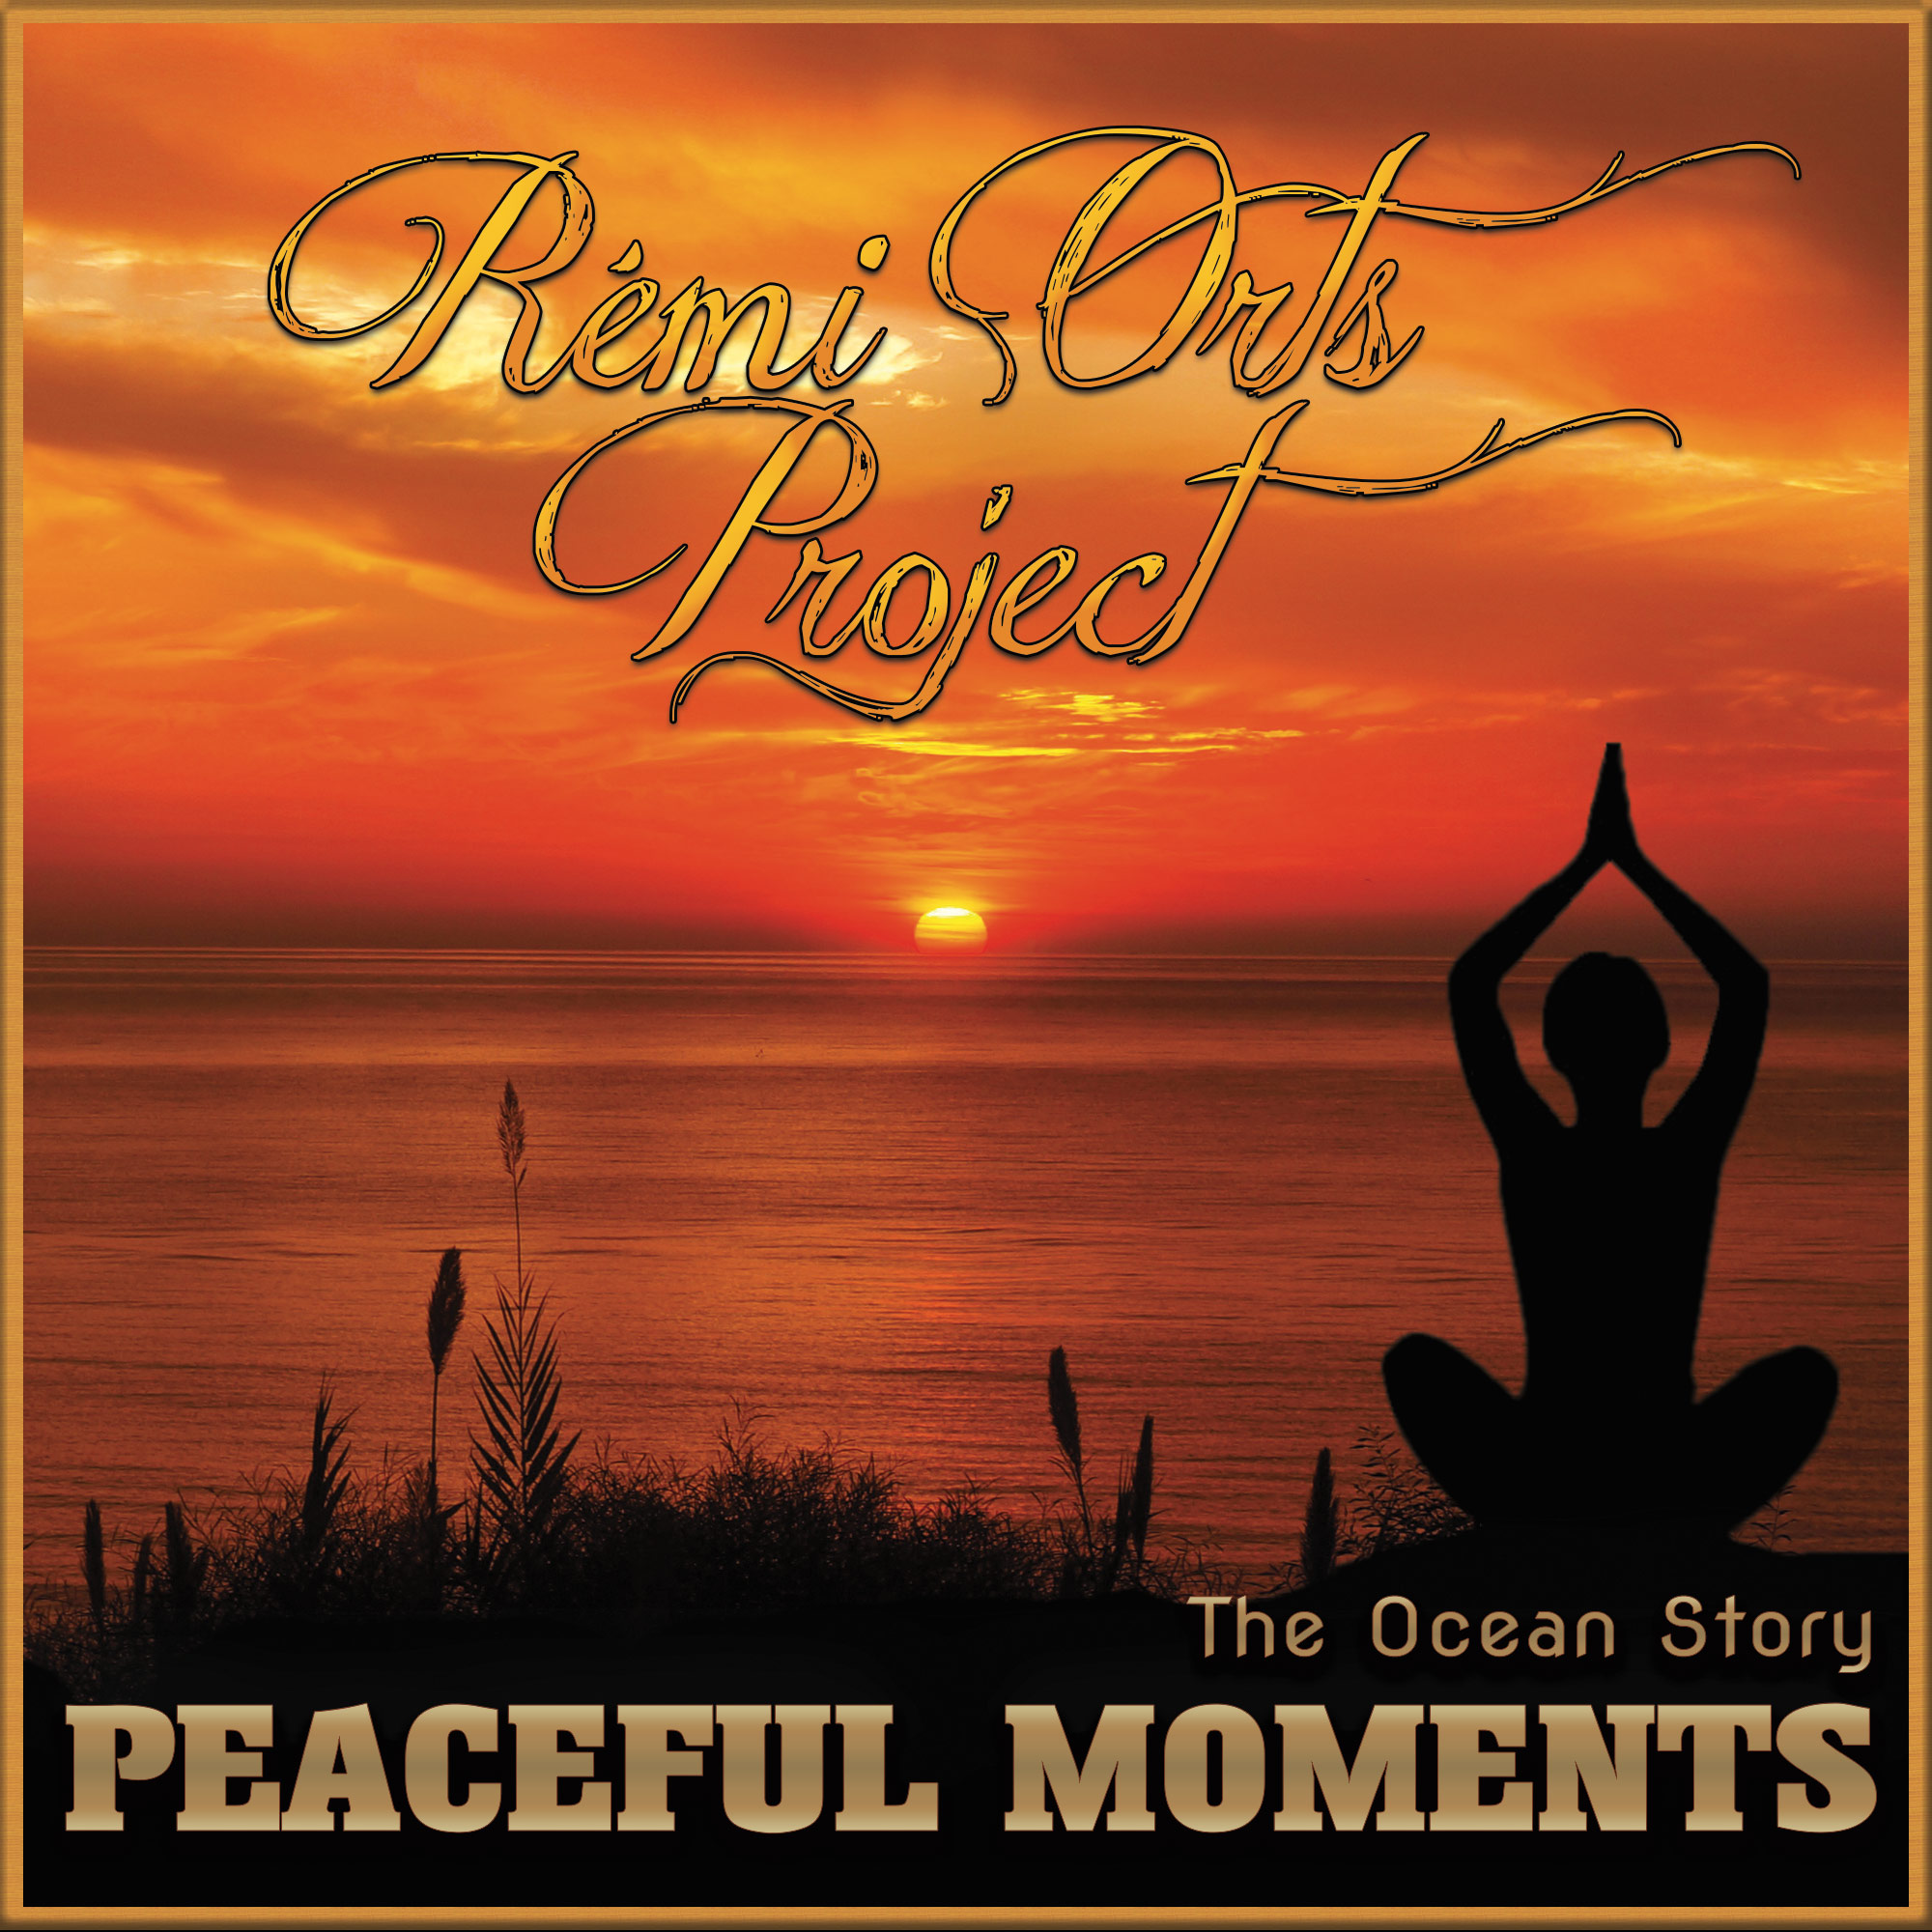 remi-orts-project-peaceful-moments